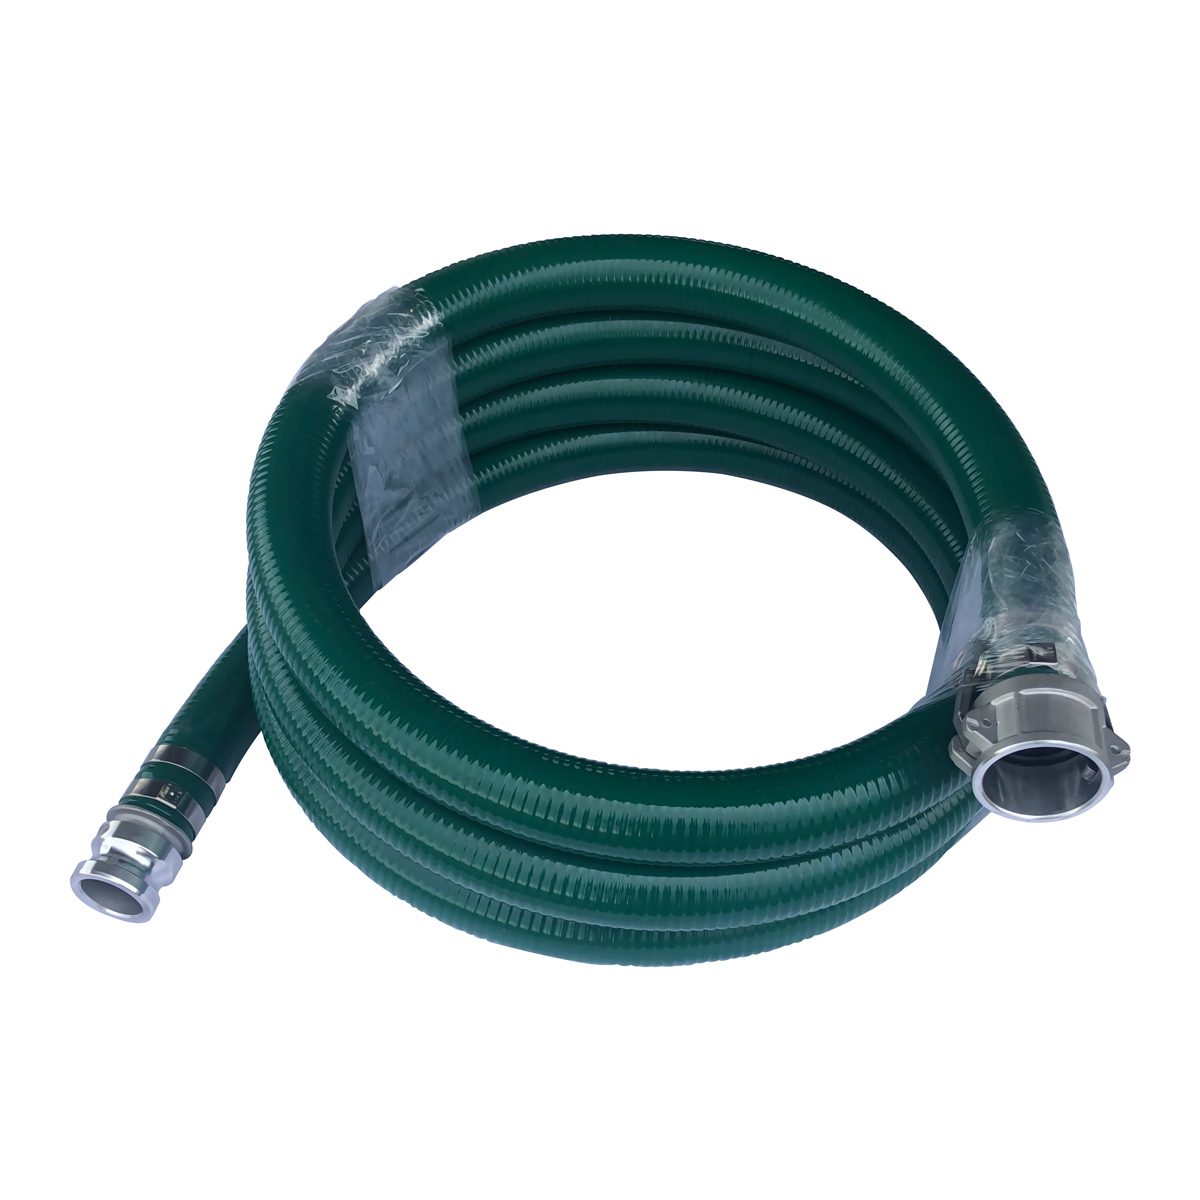 Suction HosePVC Green Standard2" x 20 FTConventional Kit25 FT Red 